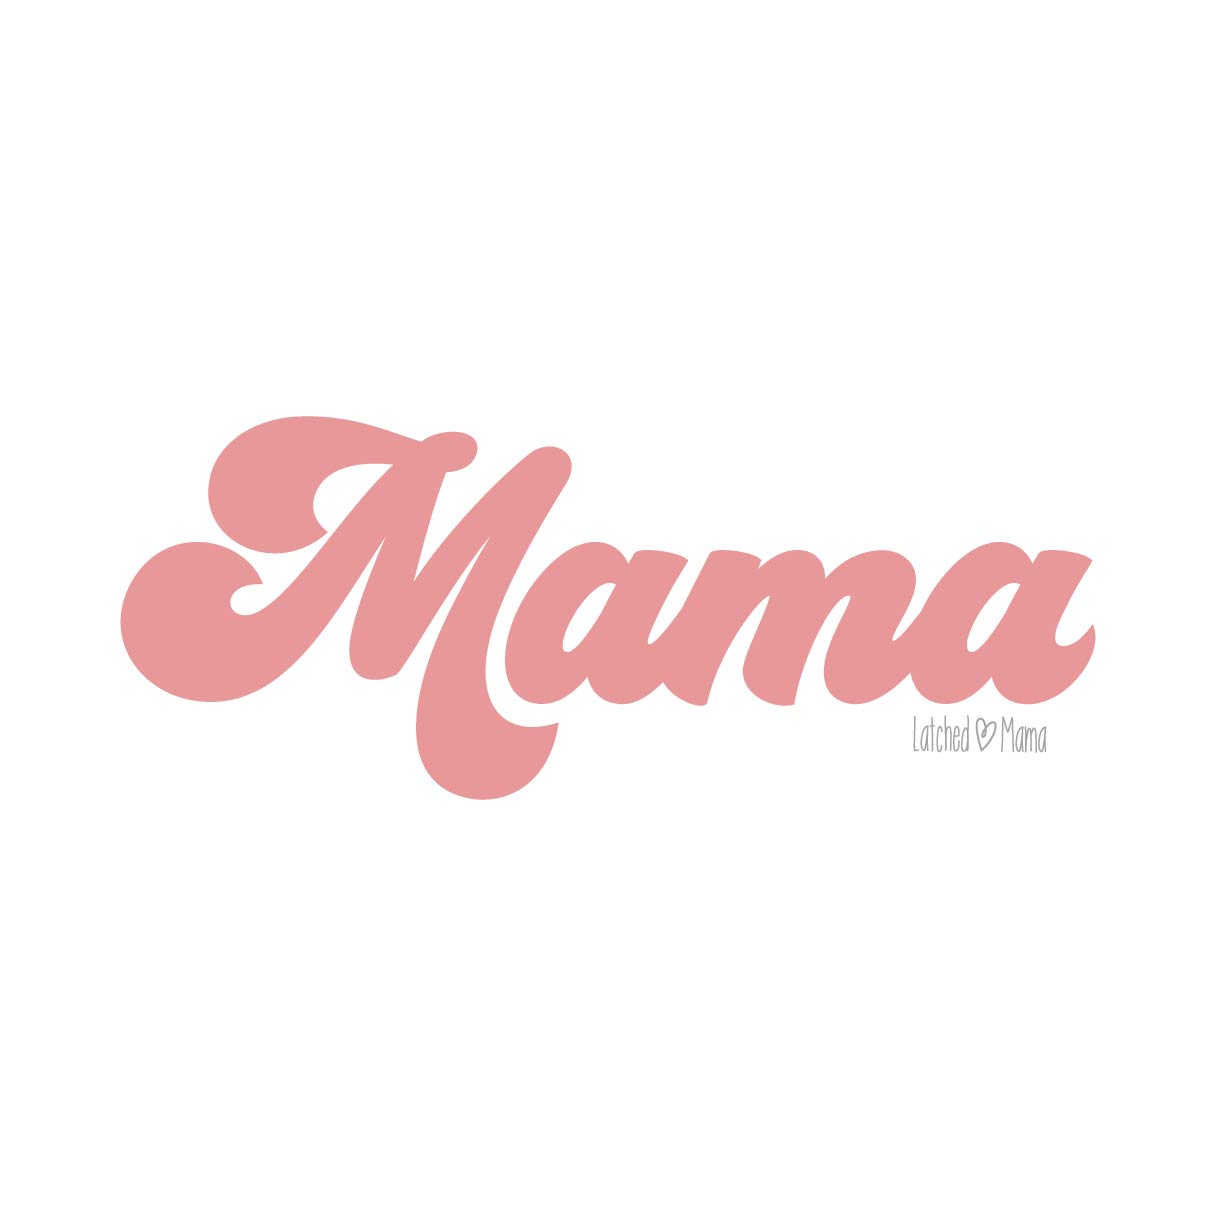 Latched Mama Ultimate Vinyl Sticker Pack - Last Chance